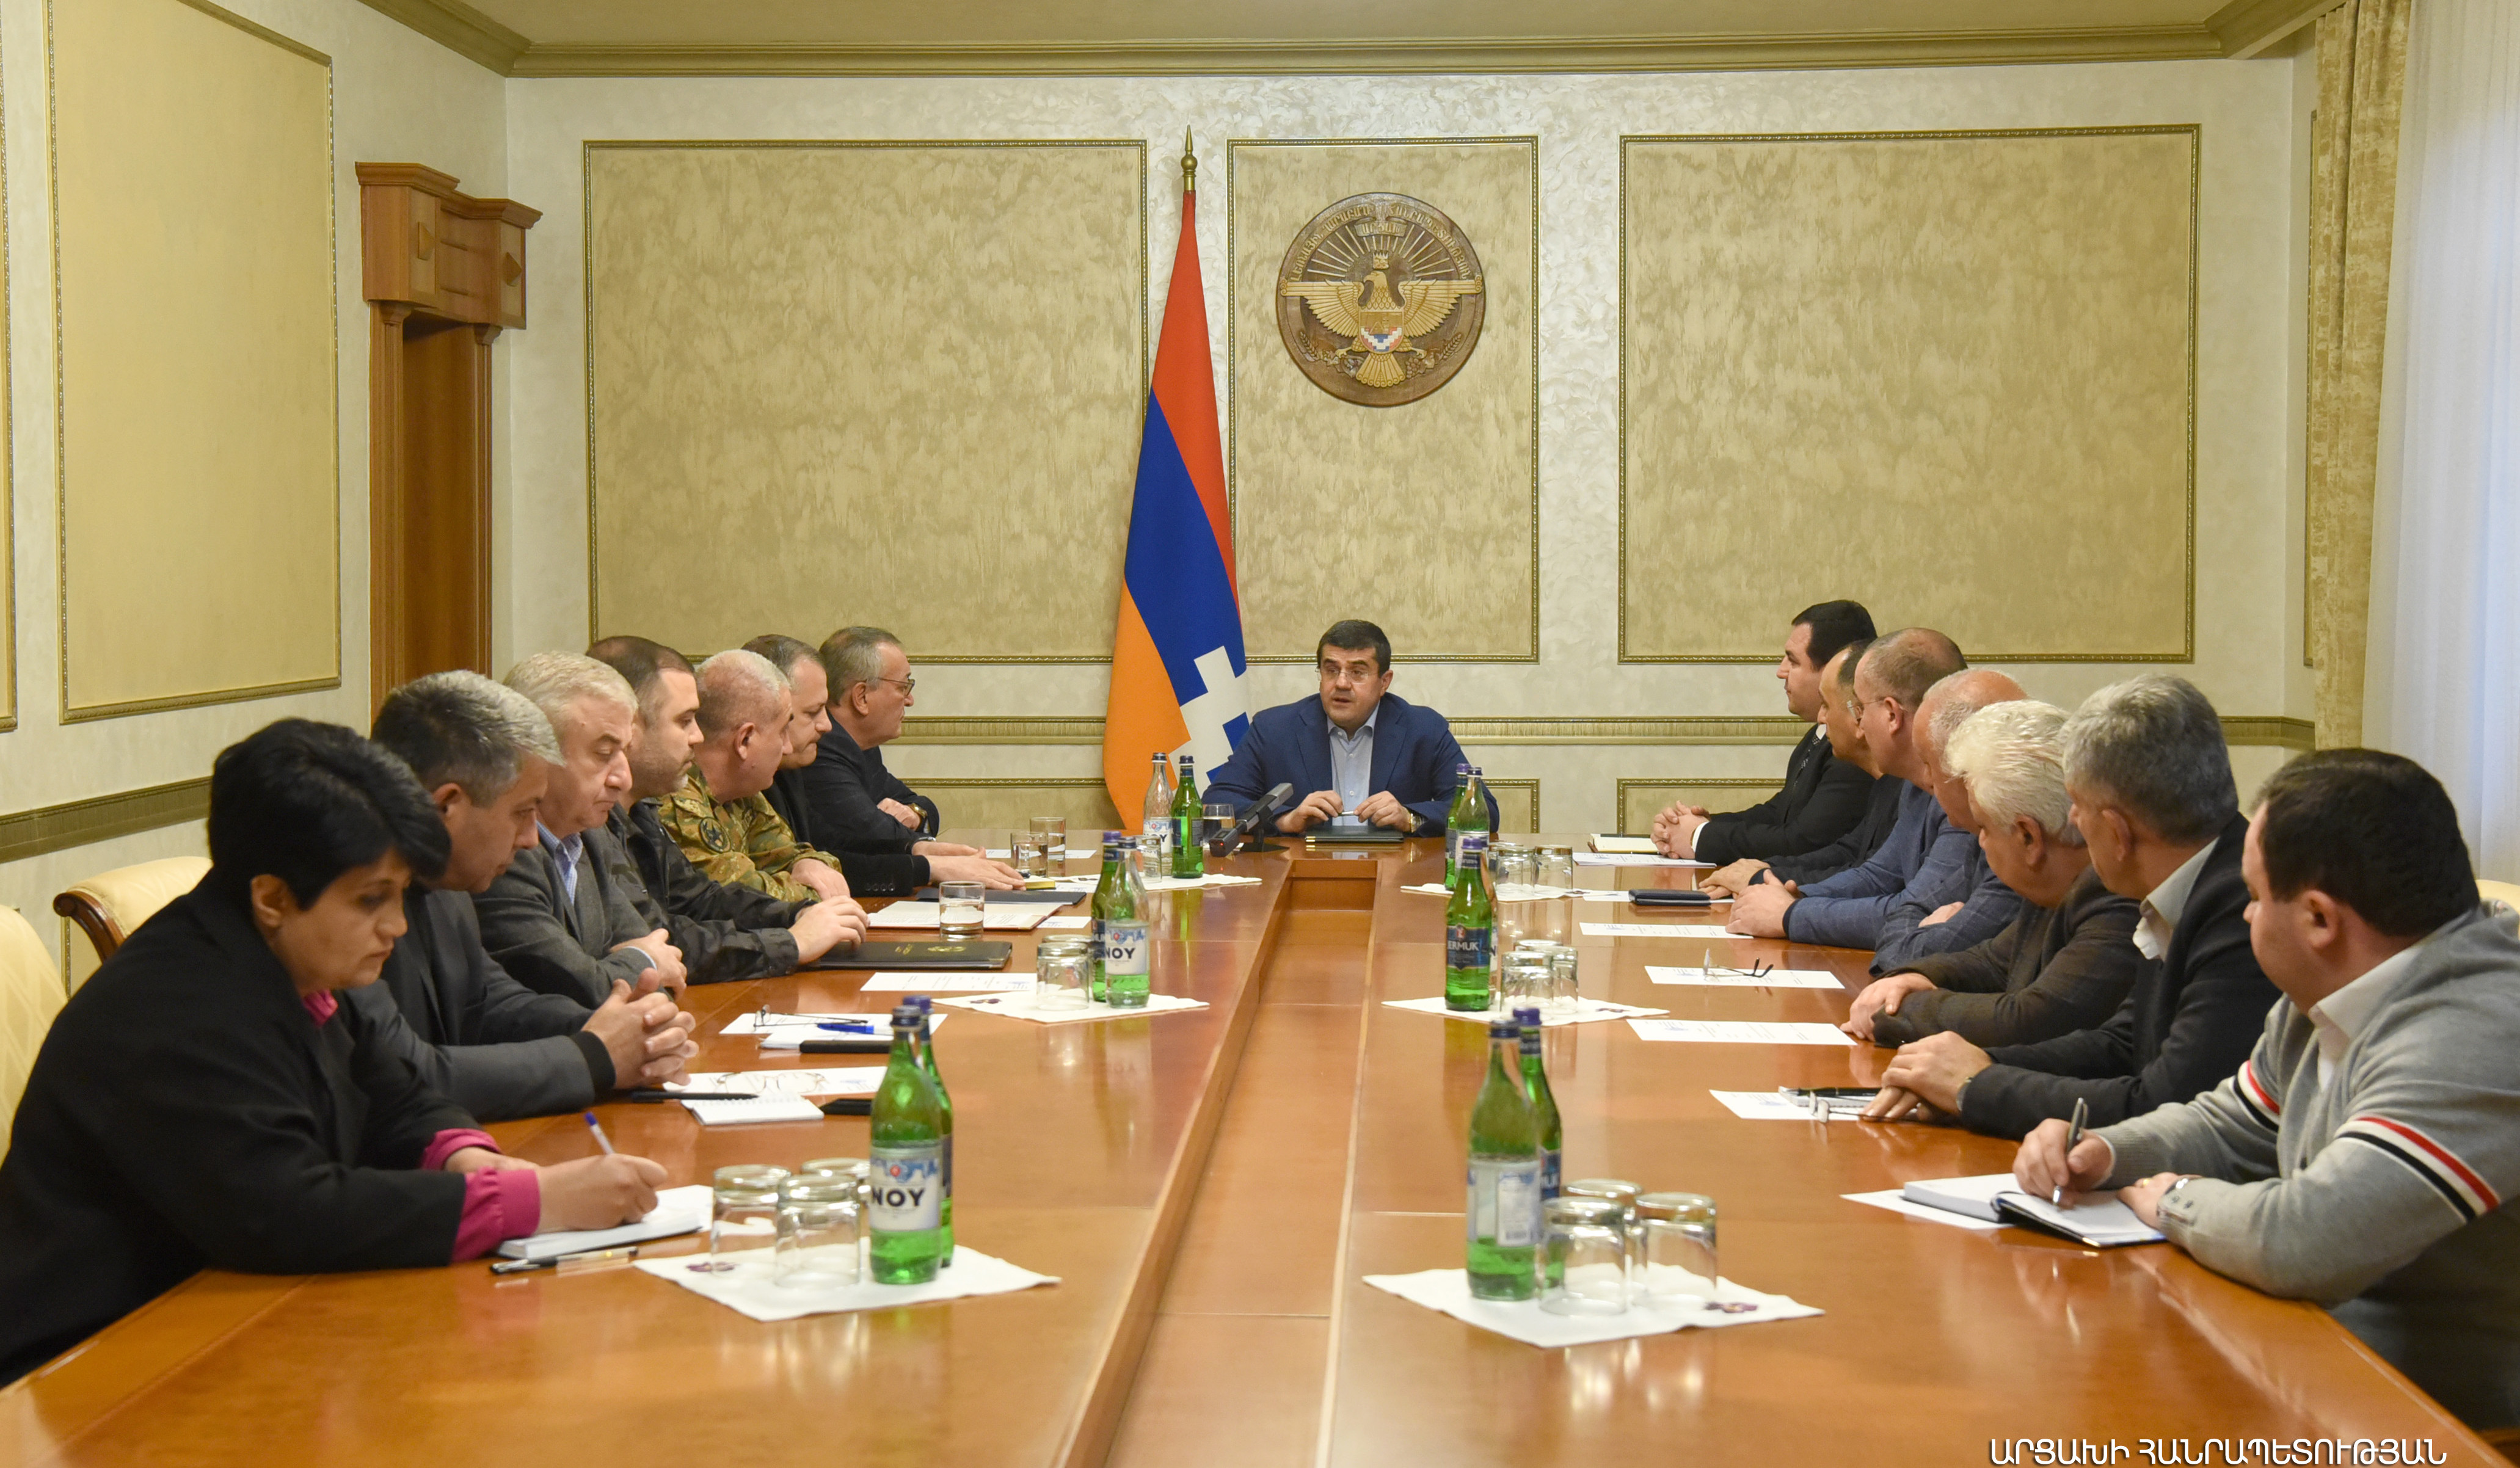 Our task is to soberly assess complexity and responsibility of situation: Security Council session convened under leadership of Artsakh President